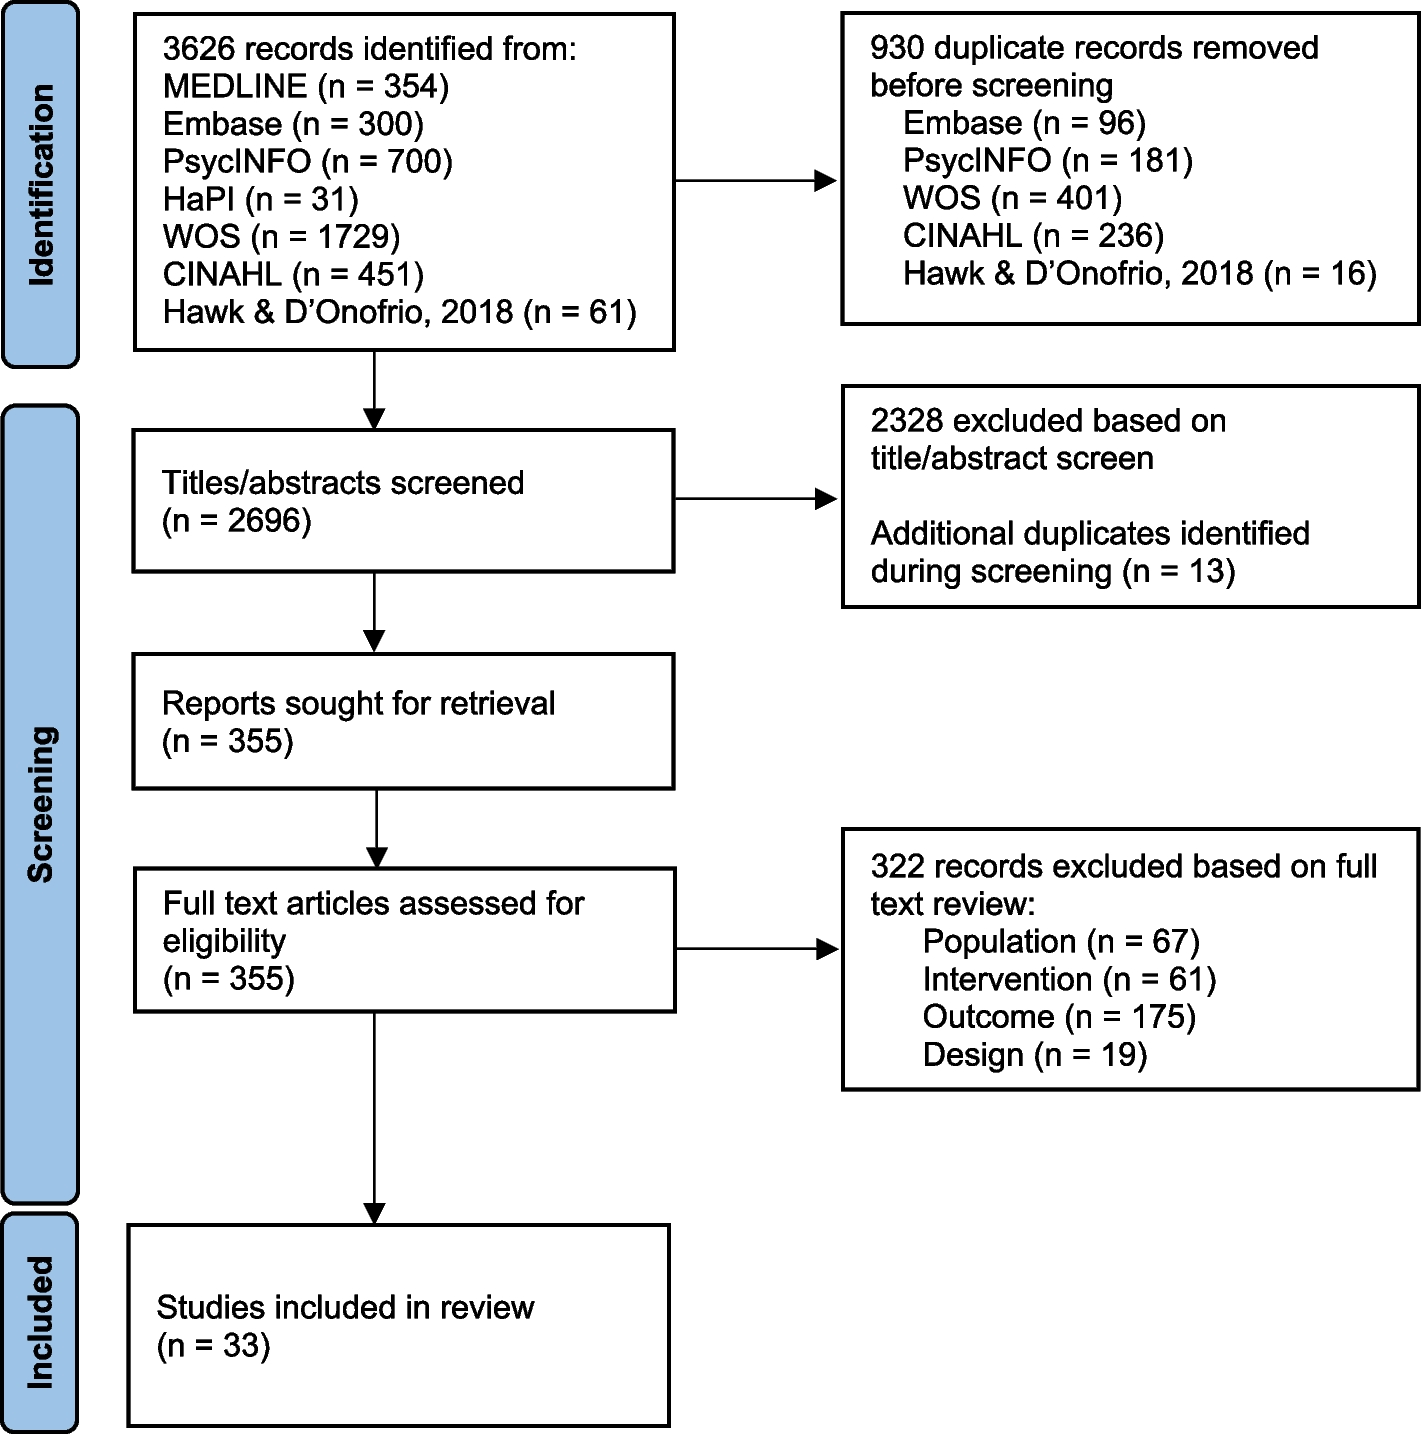 Screening for harmful substance use in emergency departments: a systematic review